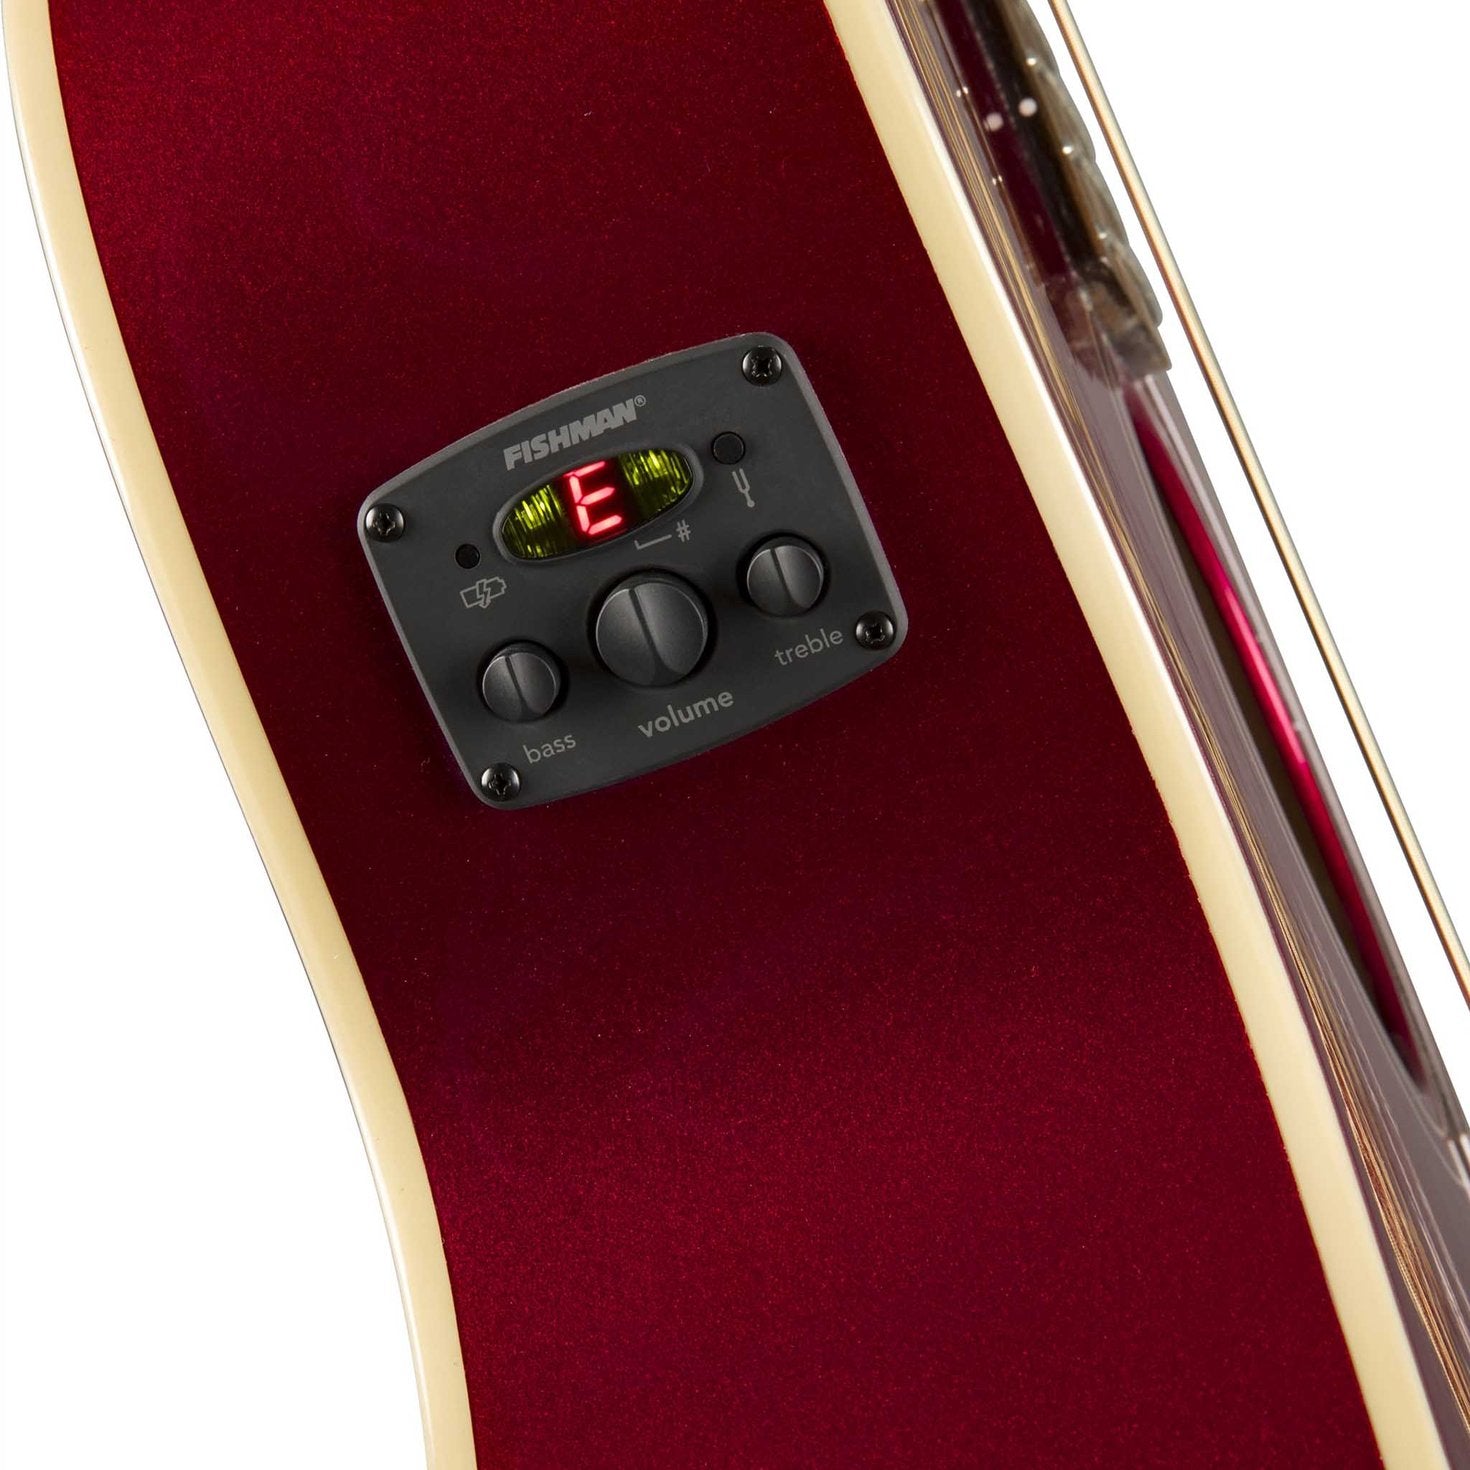 Fender Newporter Player Medium-Sized Acoustic Guitar, Candy Apple Red, FENDER, ACOUSTIC GUITAR, fender-acoustic-guitar-f03-097-0743-009, ZOSO MUSIC SDN BHD